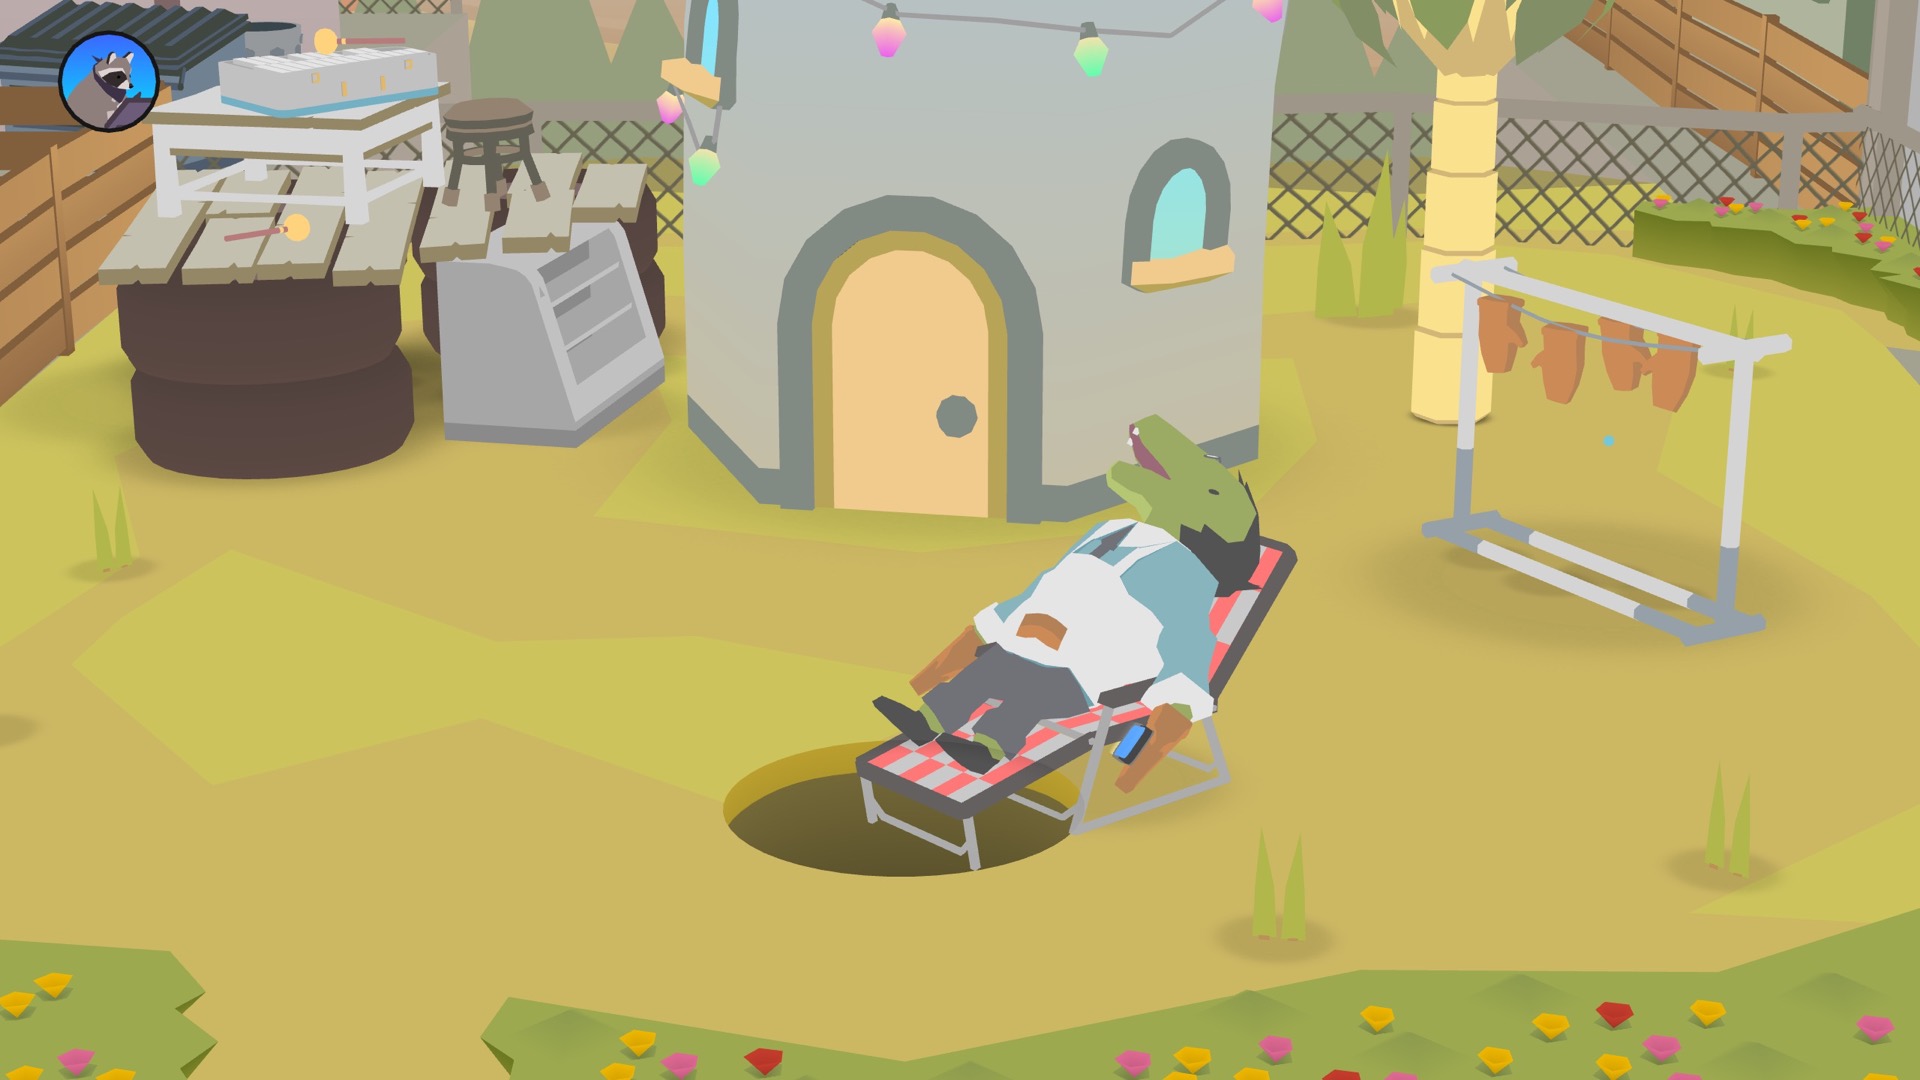 Screenshot of the game Donut County showing an anthropomorphic crocodile on a sun lounger about to fall into a hole.